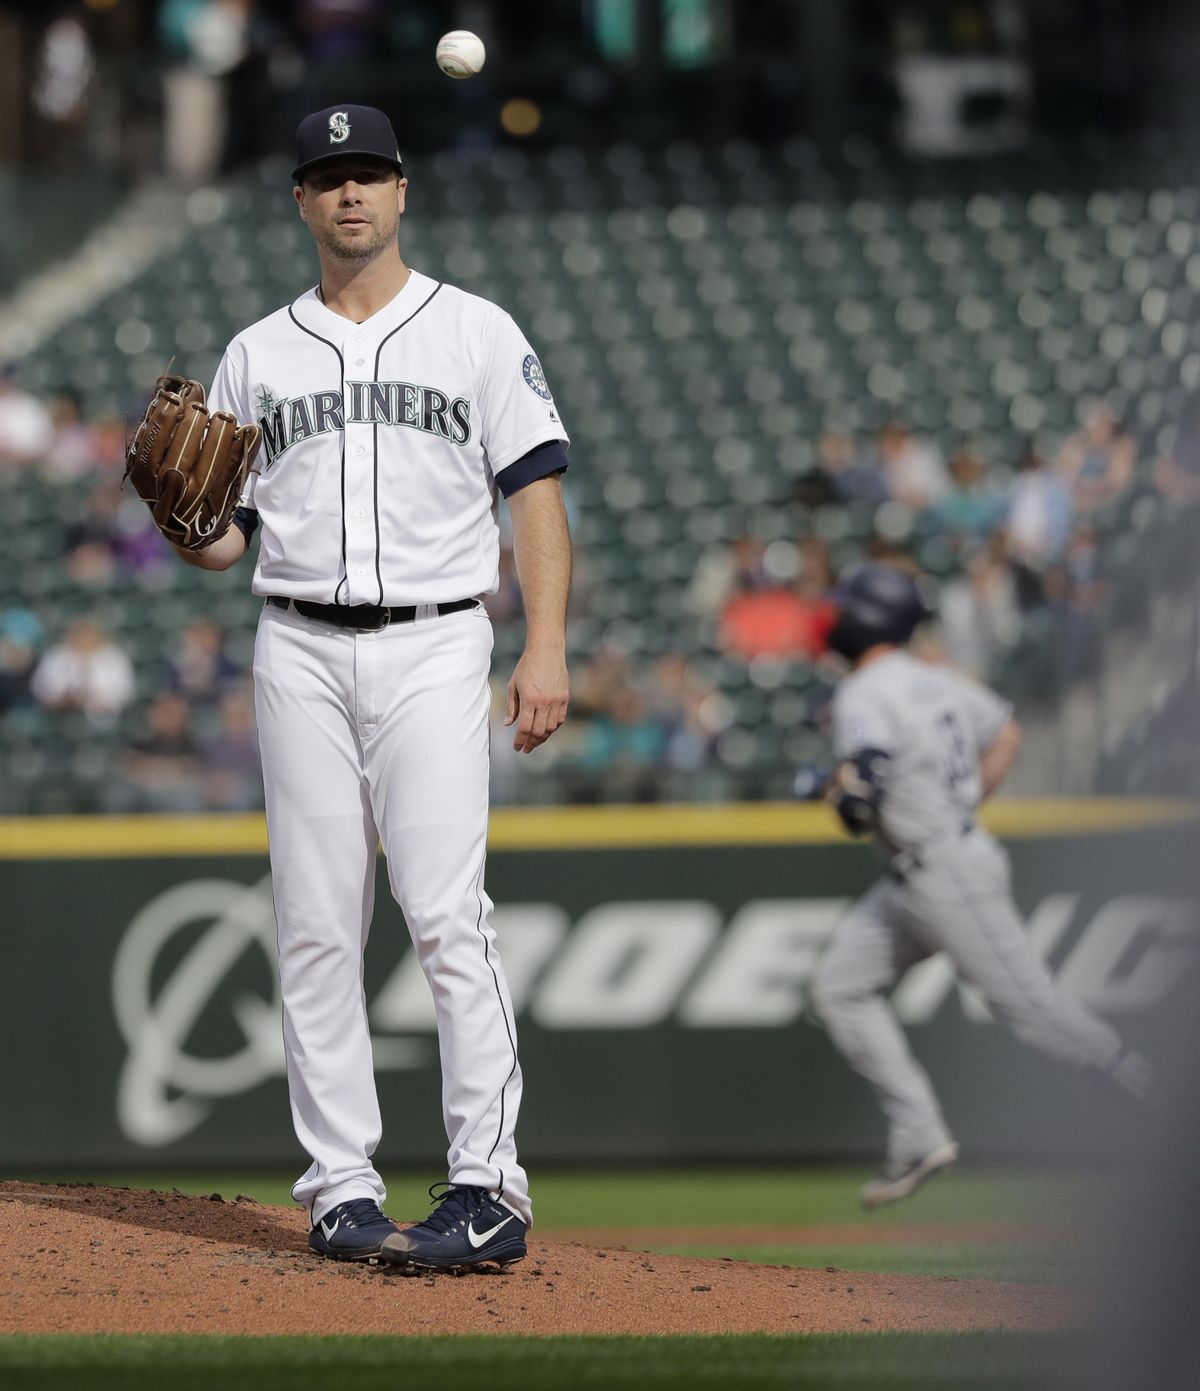 Seattle Mariners starting pitcher Wade LeBlanc tosses the baseball as San Diego Padres